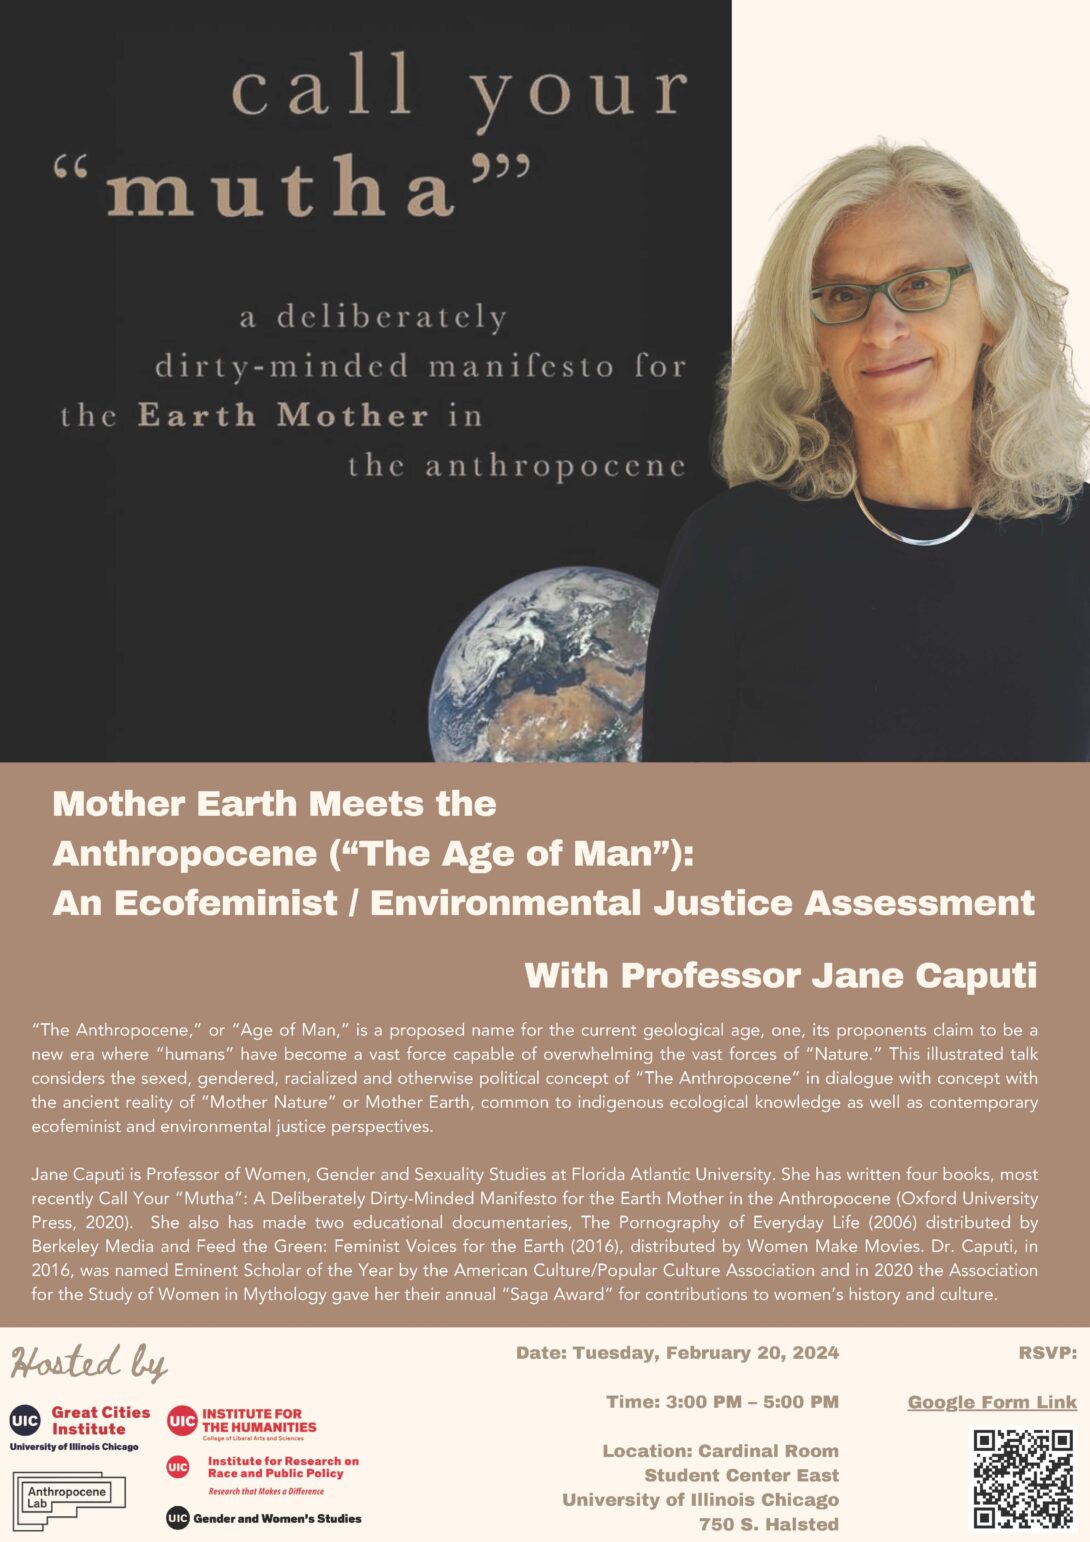 Event flyer with a photo of Professor Jane Caputi on the upper right half. The upper left half is a black background with the event title in tan font and a photo of planet earth. The middle section of the flyer has a tan background with information about the talk and Professor Caputi in a lighter font. The bottom portion of the flyer is a cream background, with event date, time, location in black font, logos of event co-sponors, a QR code to register, and a link to register..